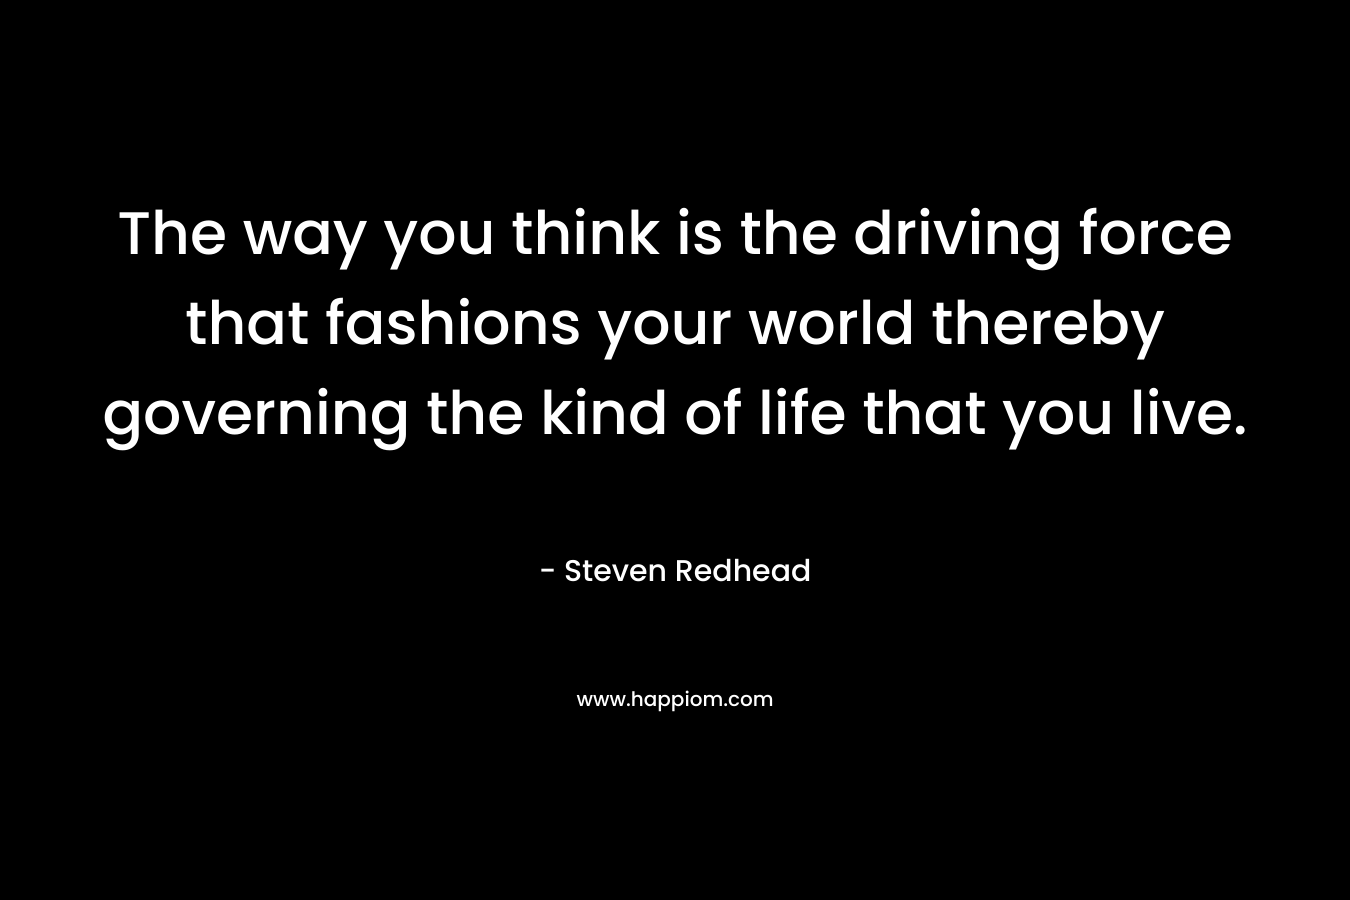 The way you think is the driving force that fashions your world thereby governing the kind of life that you live.